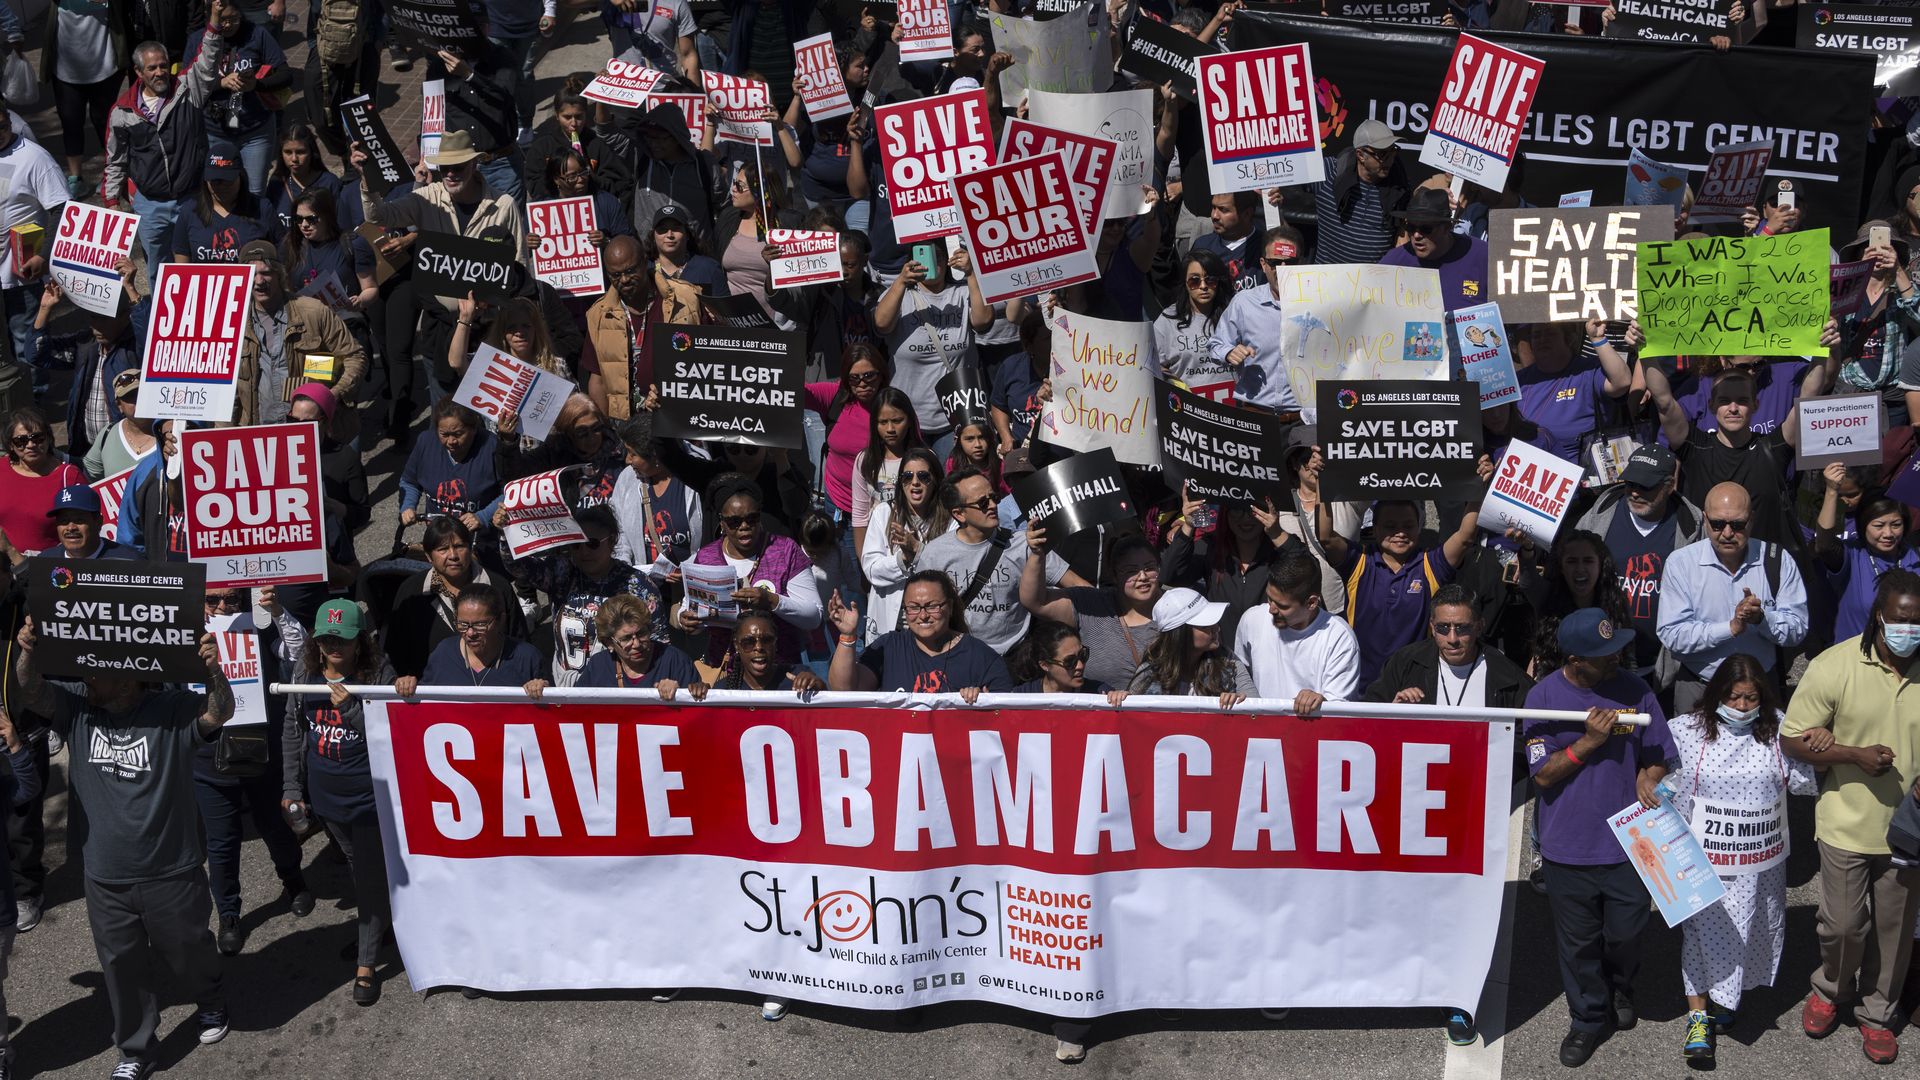 Big Affordable Care Act rally in Los Angeles, with a "Save Obamacare" sign